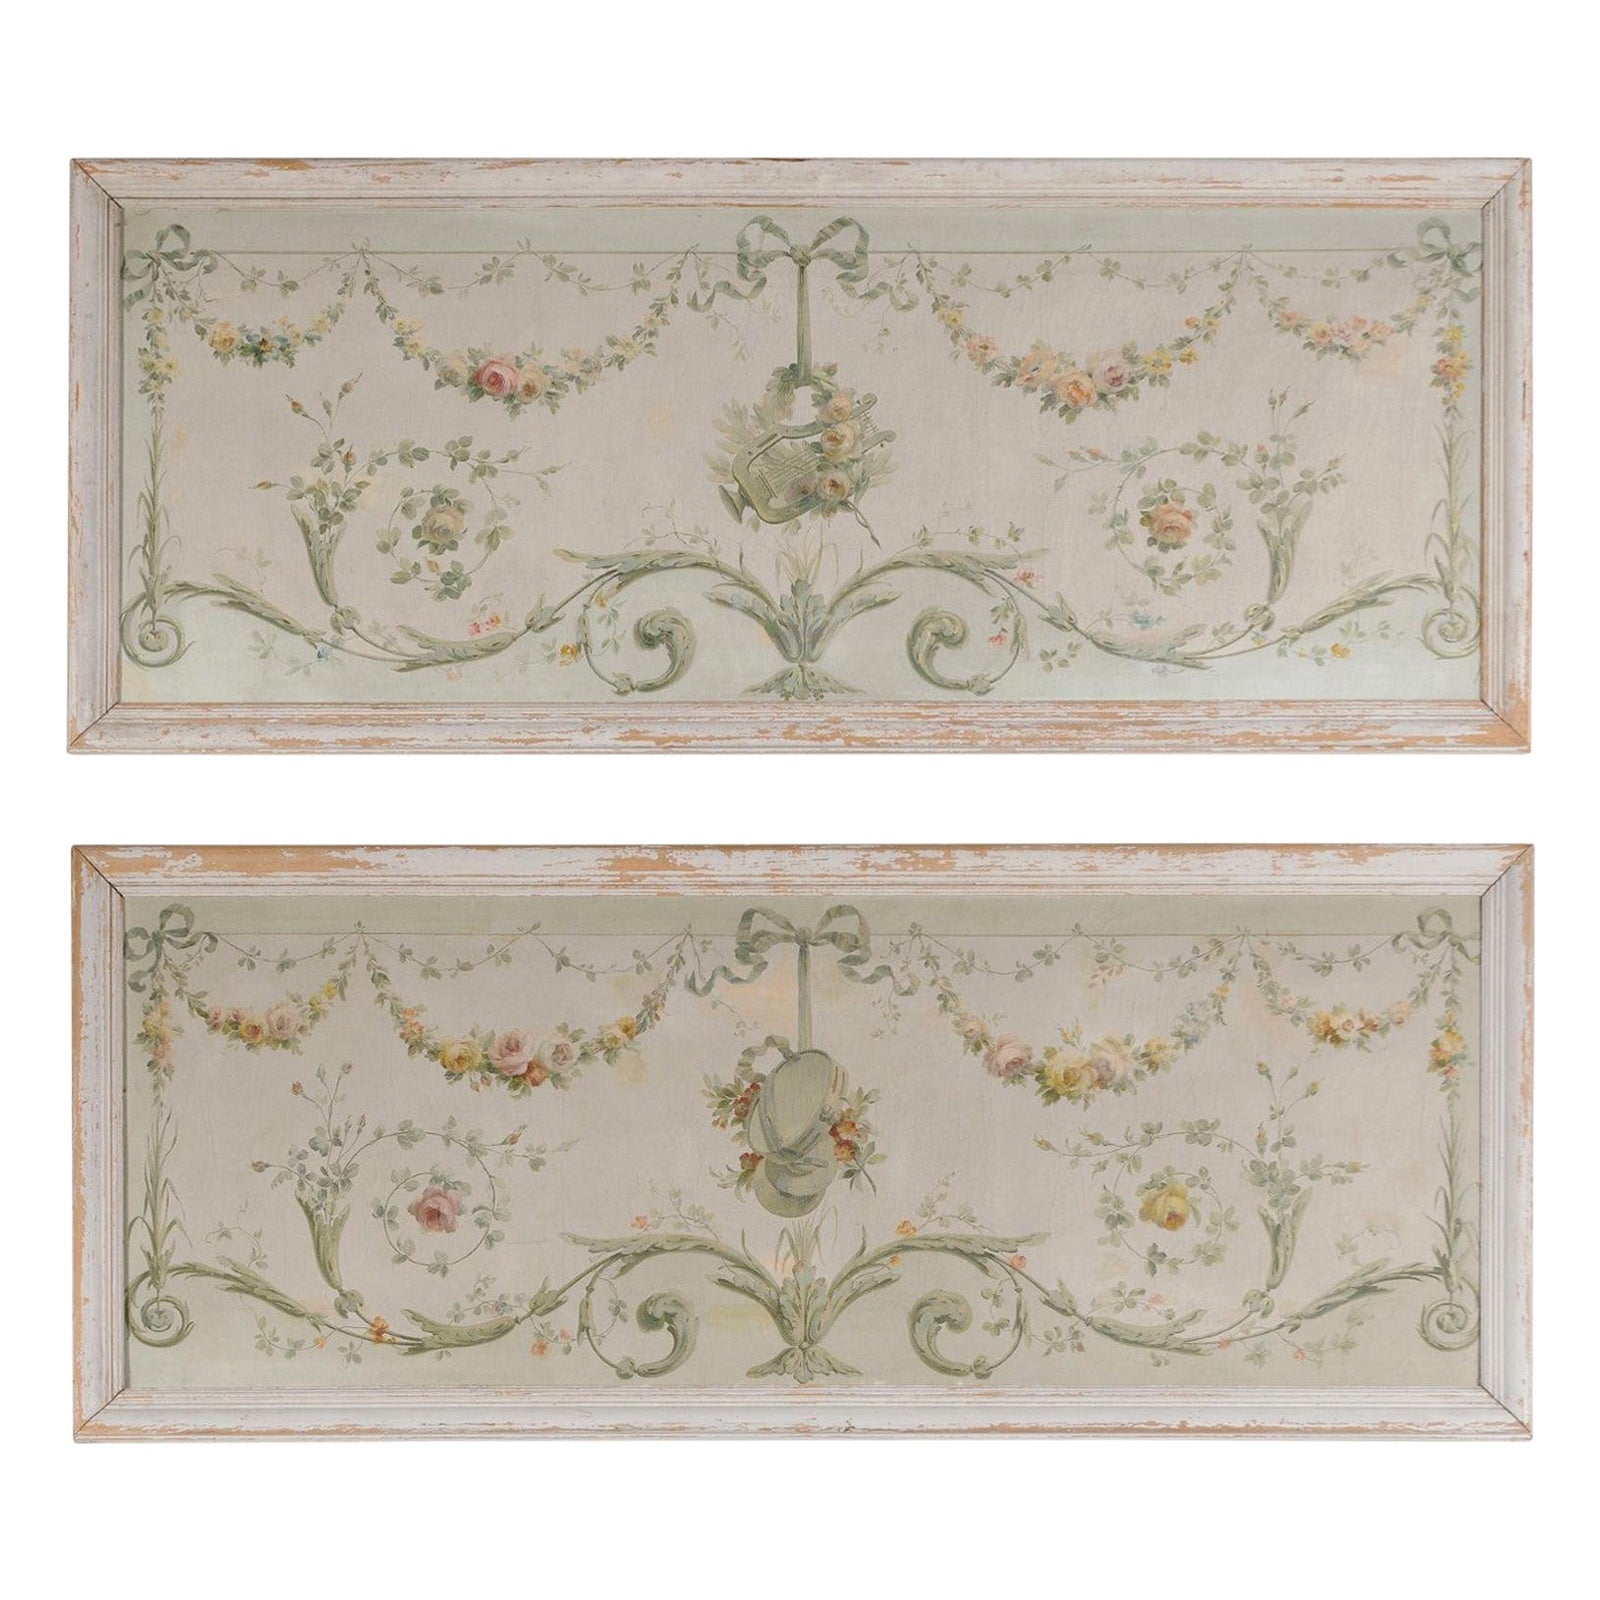 Pair of French Napoléon III 1860s Oil on Canvas Overdoors with Floral Garlands